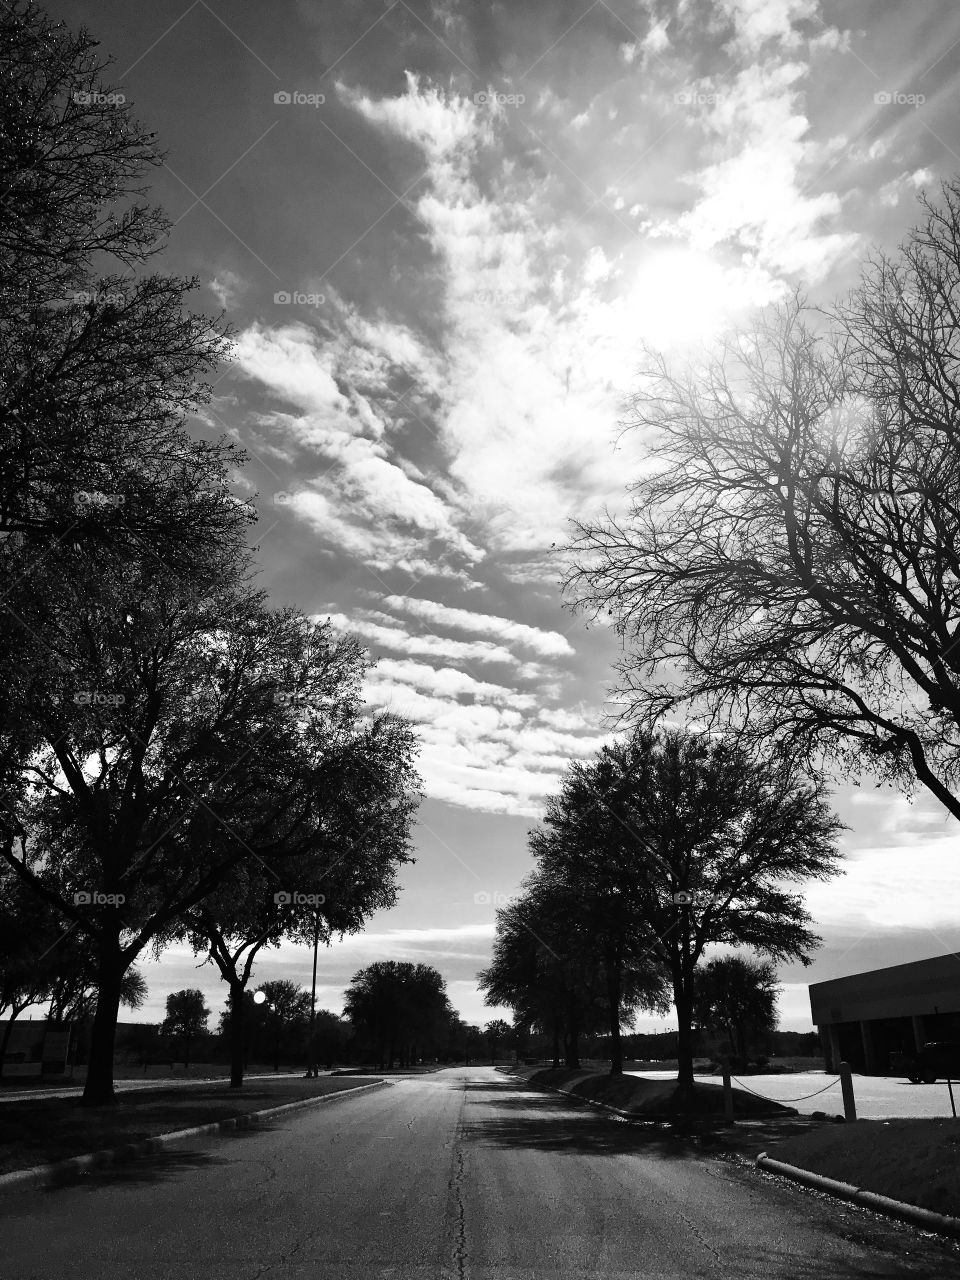 Tree Lined Street in Black and White